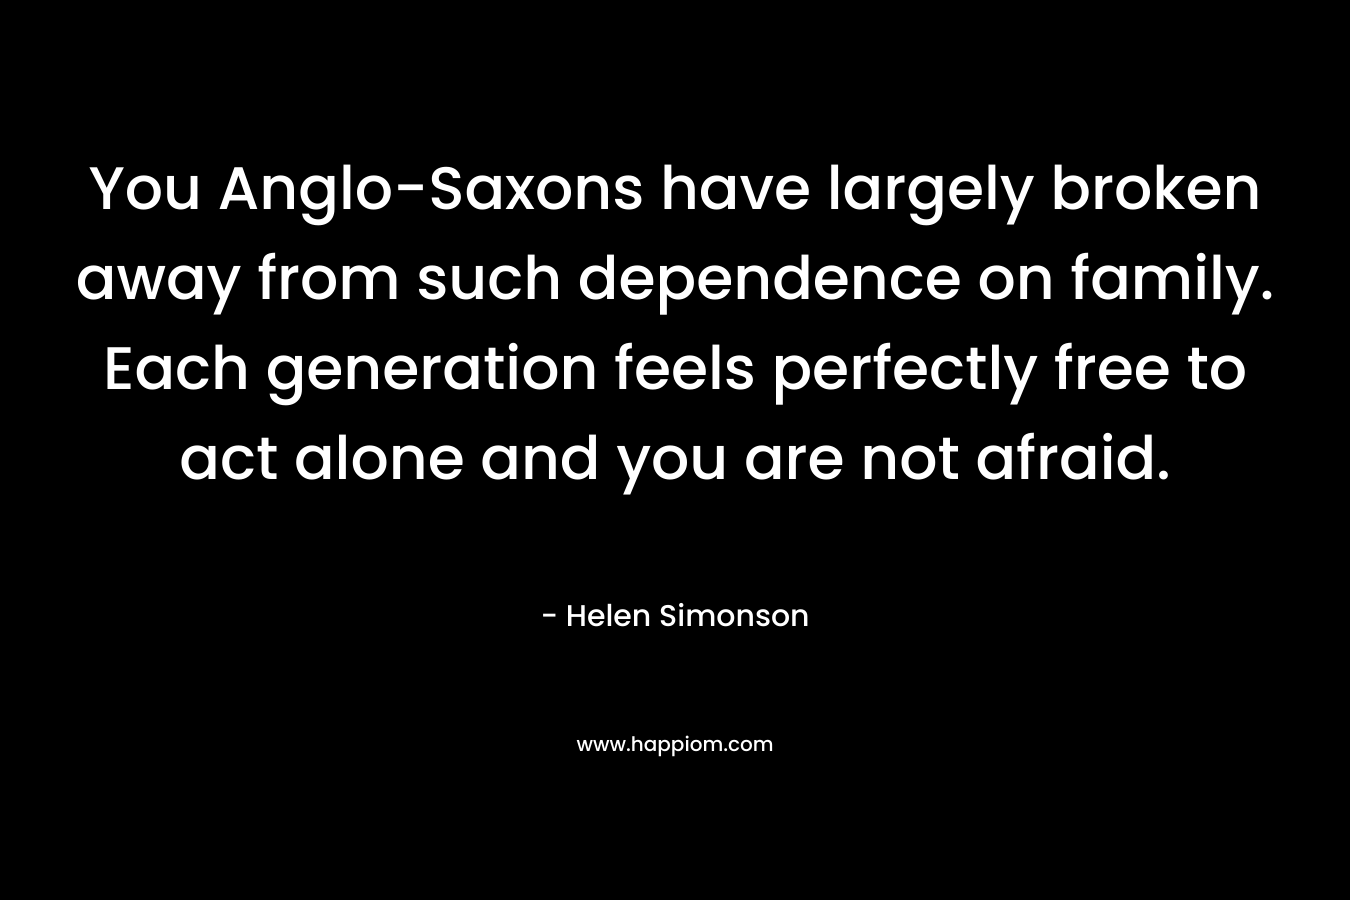 You Anglo-Saxons have largely broken away from such dependence on family. Each generation feels perfectly free to act alone and you are not afraid. – Helen Simonson